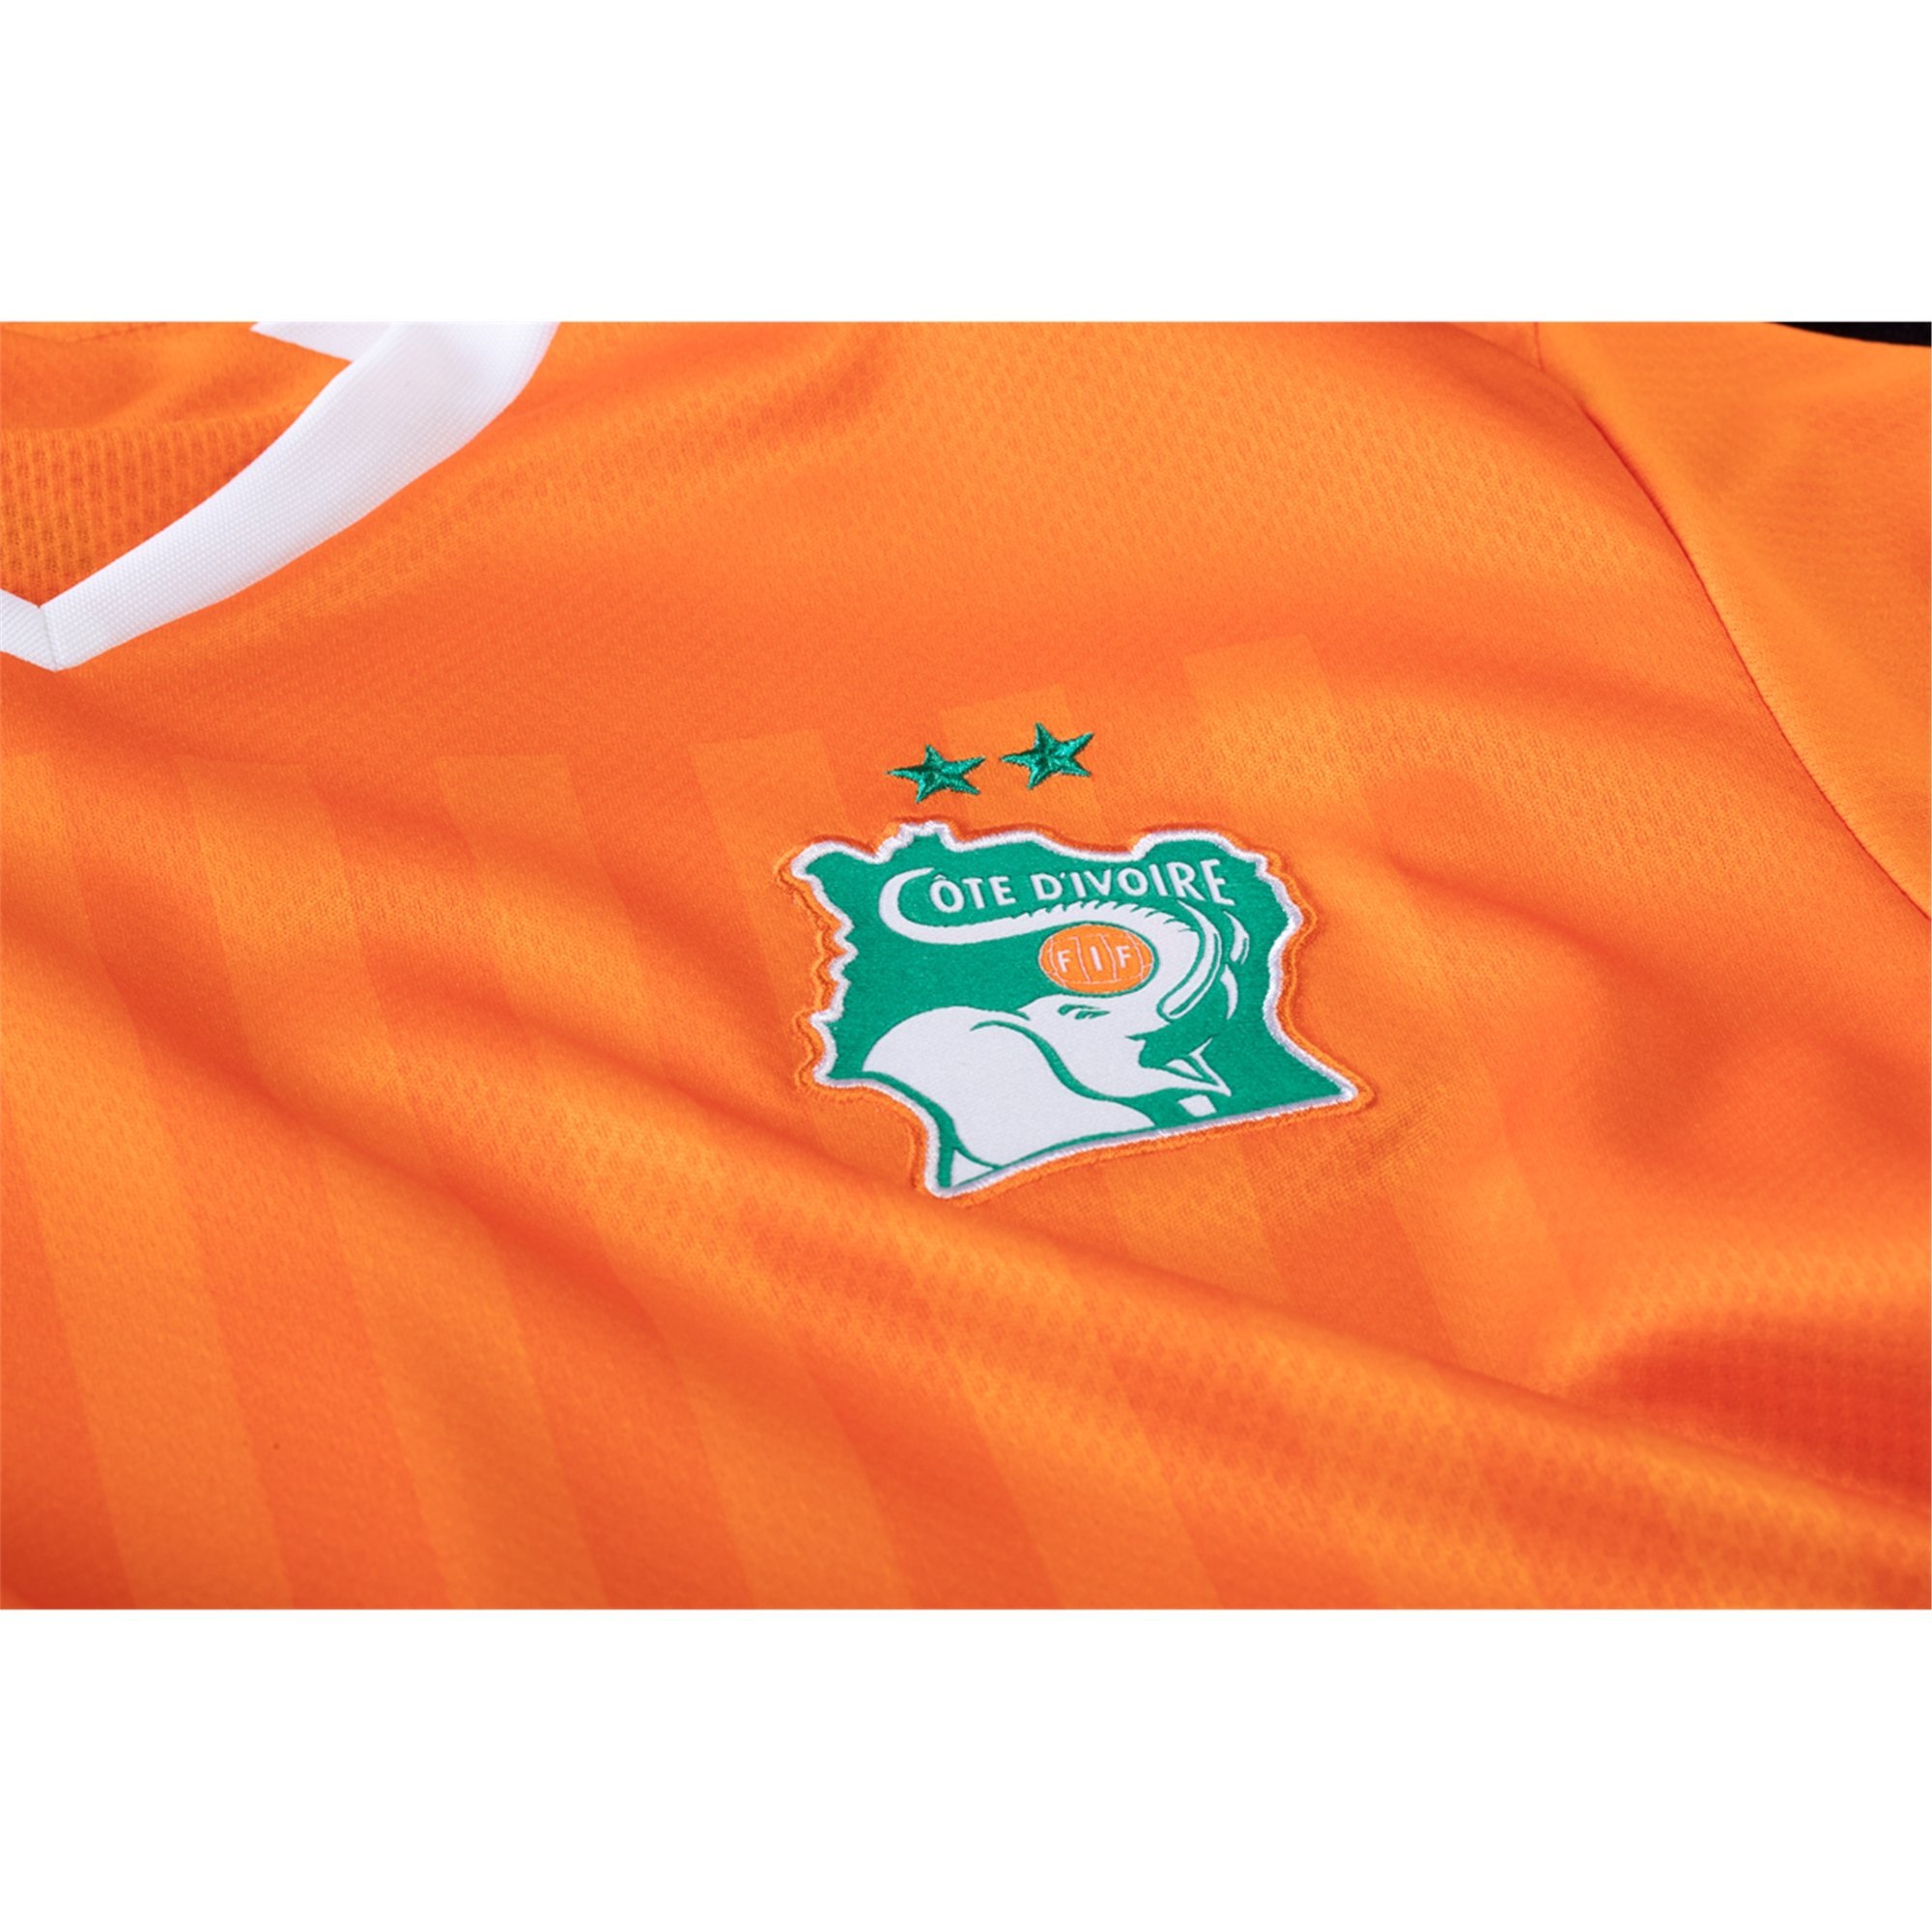 Mose Pearly gaben 22/23 Ivory Coast Home Jersey Online | Jersey Loco